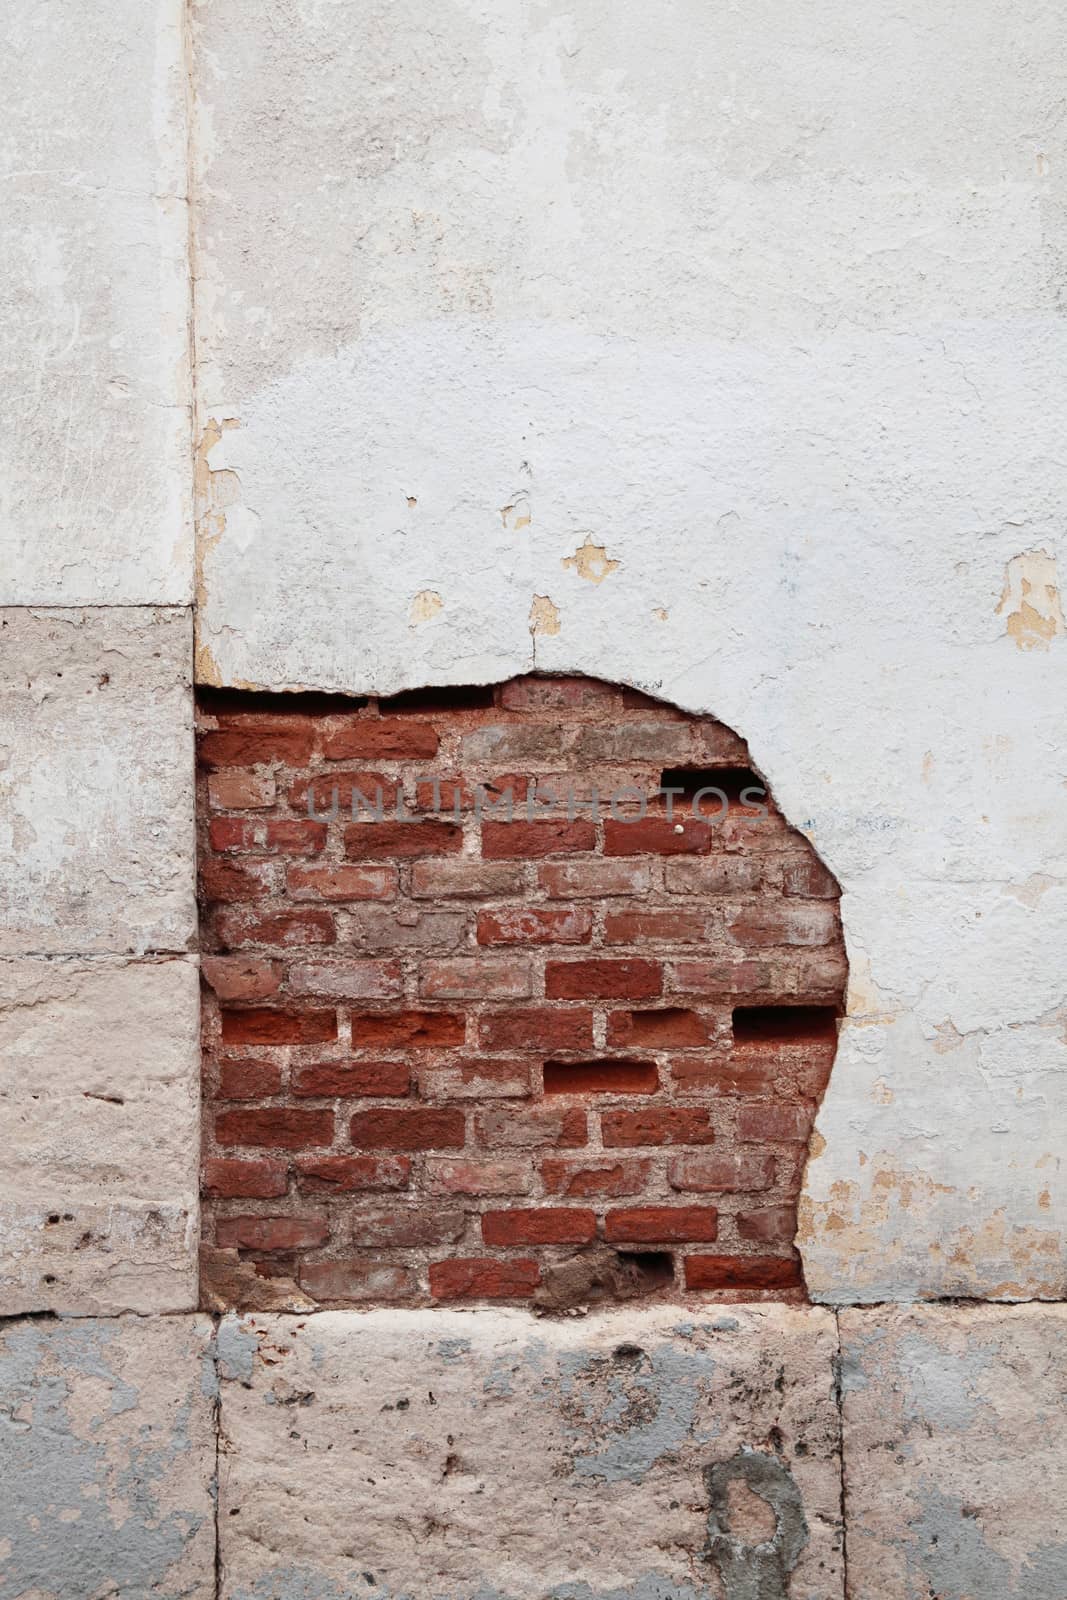 Destroyed concrete and brick wall